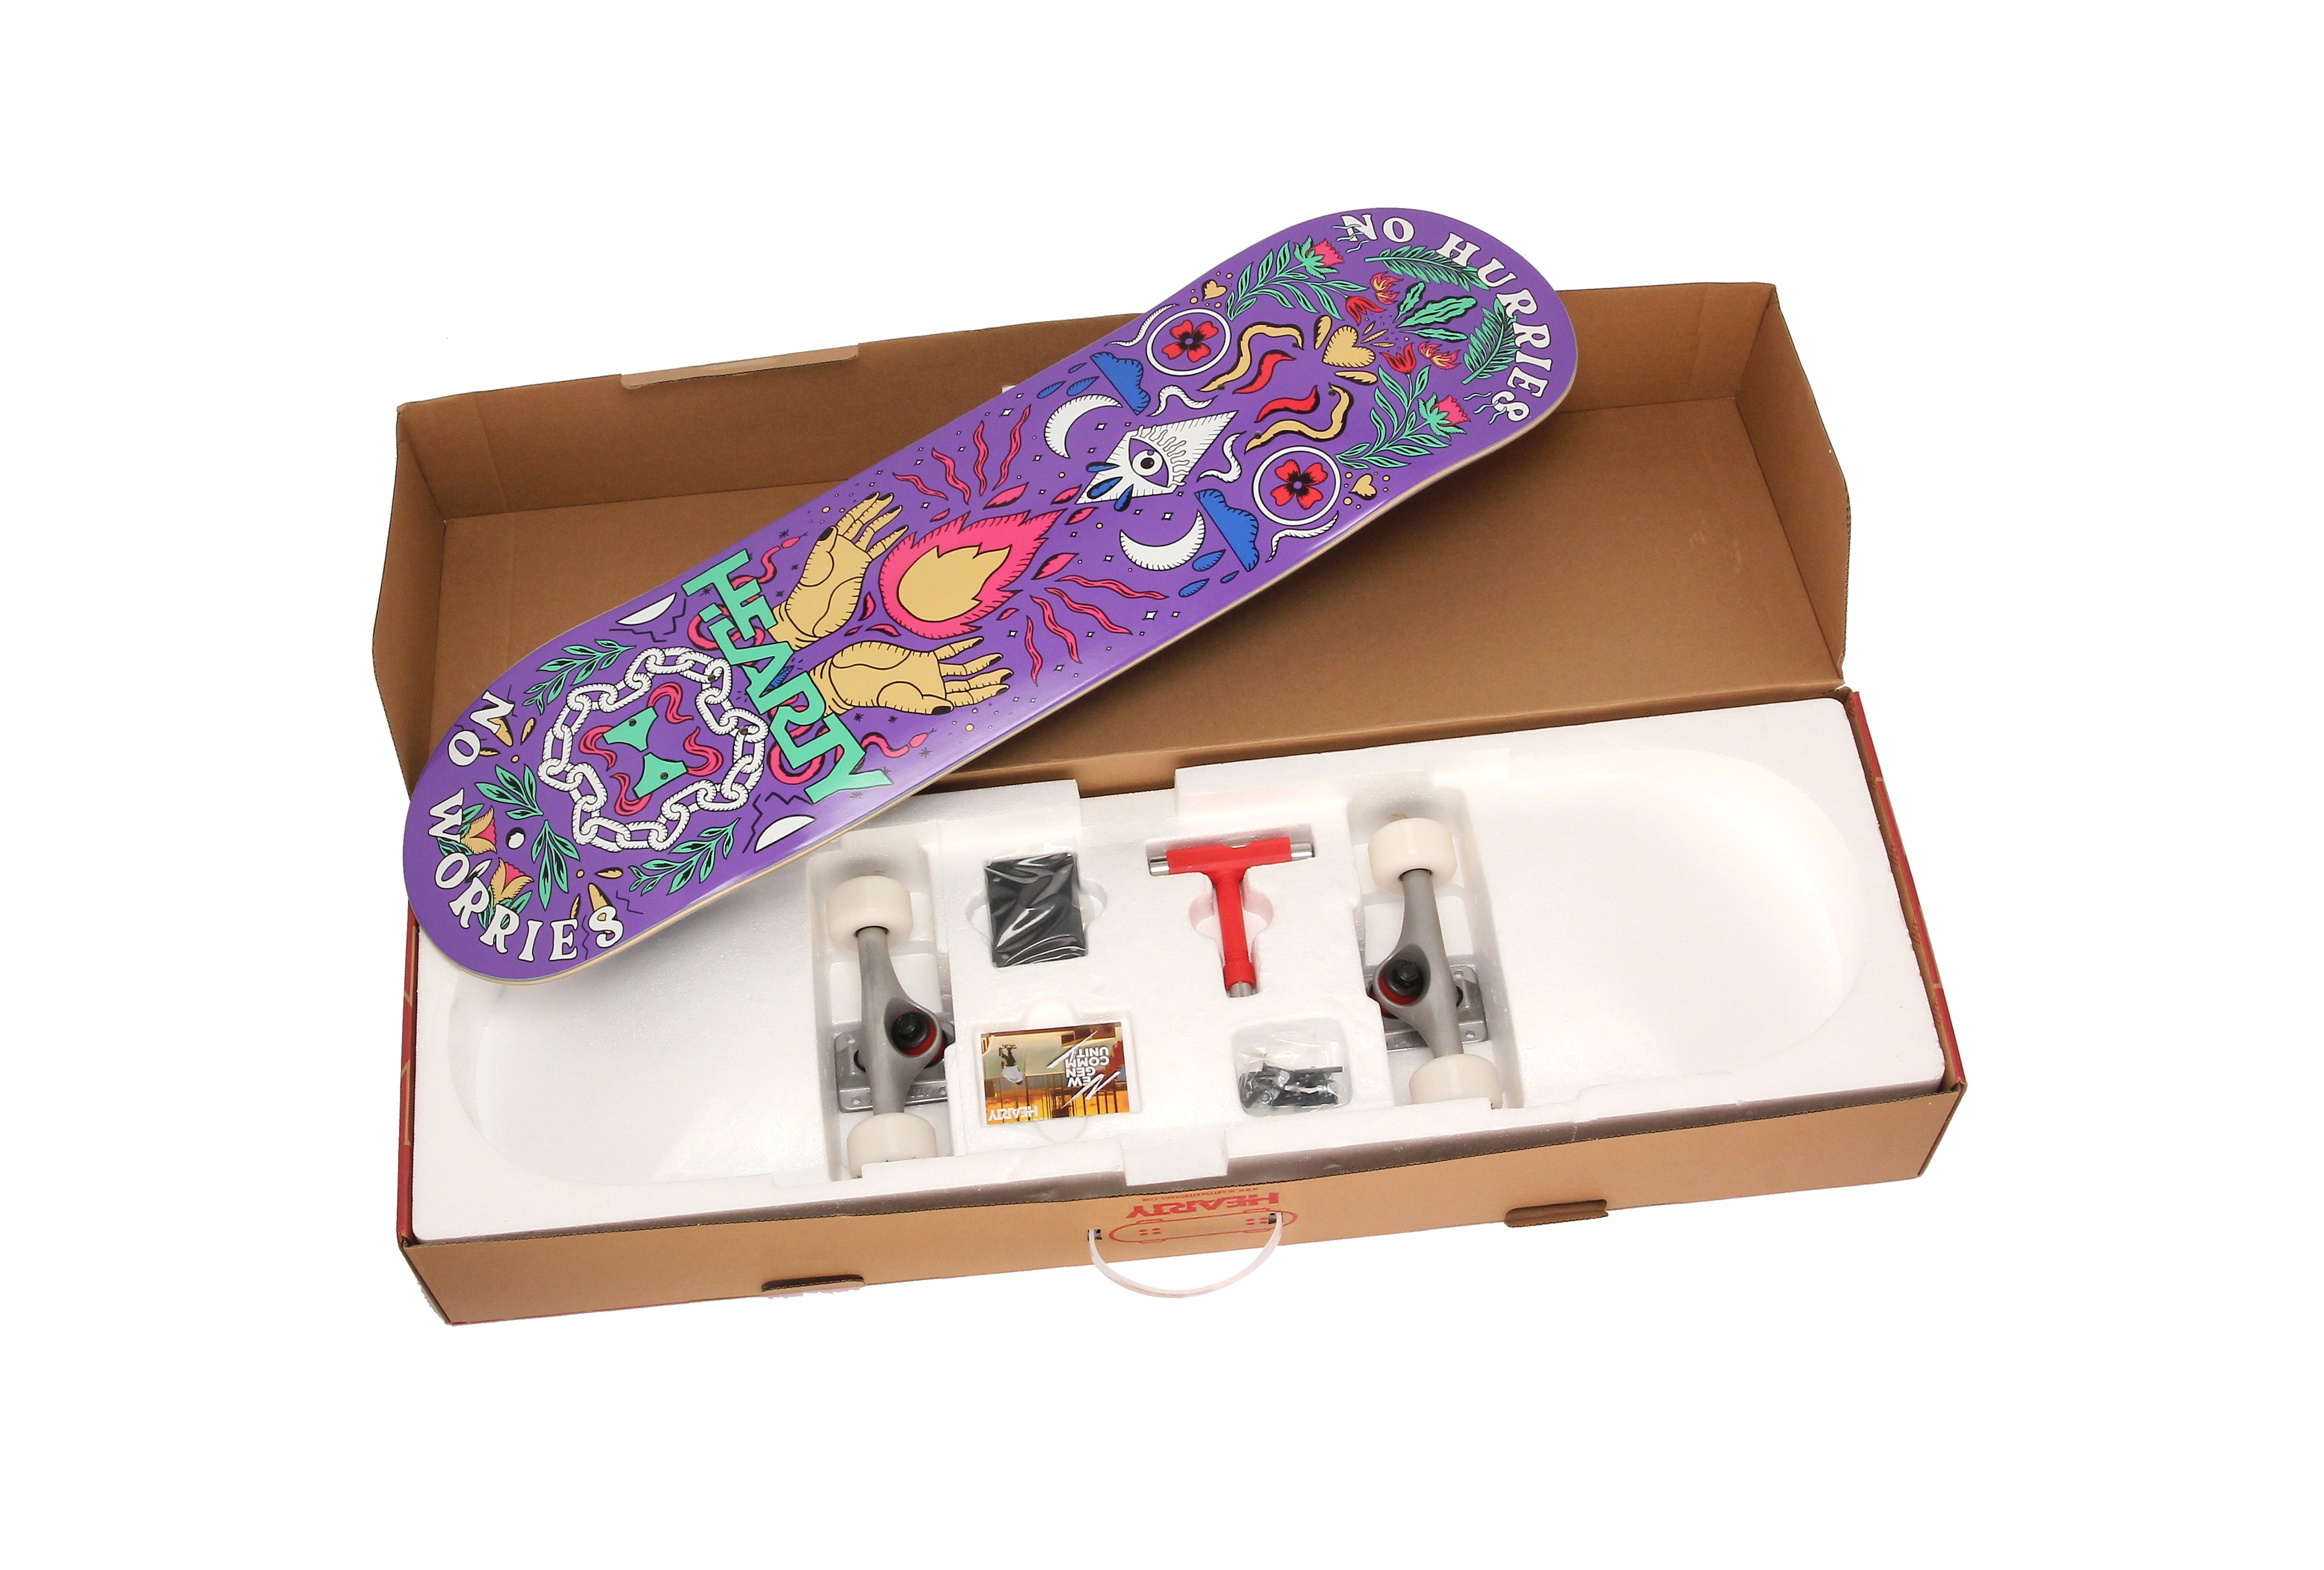 Hearty Pro-Complete Skateboard Pack- Unassembled- 8.0" & 8.25"-No Hurries No Worries/Purple